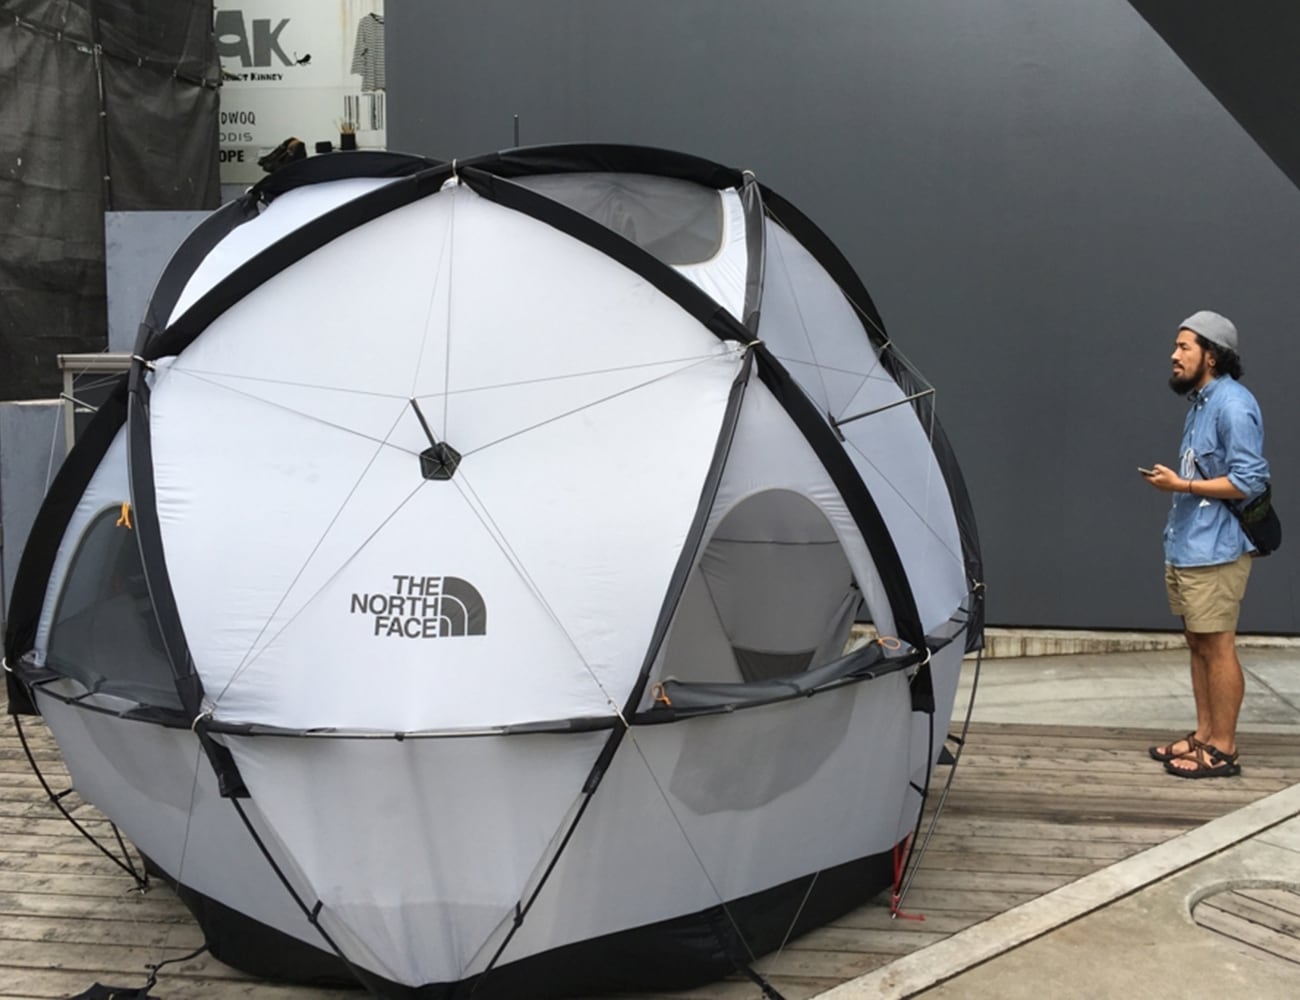 North Face Geodome 4 Circular Tent is a modern take on camping